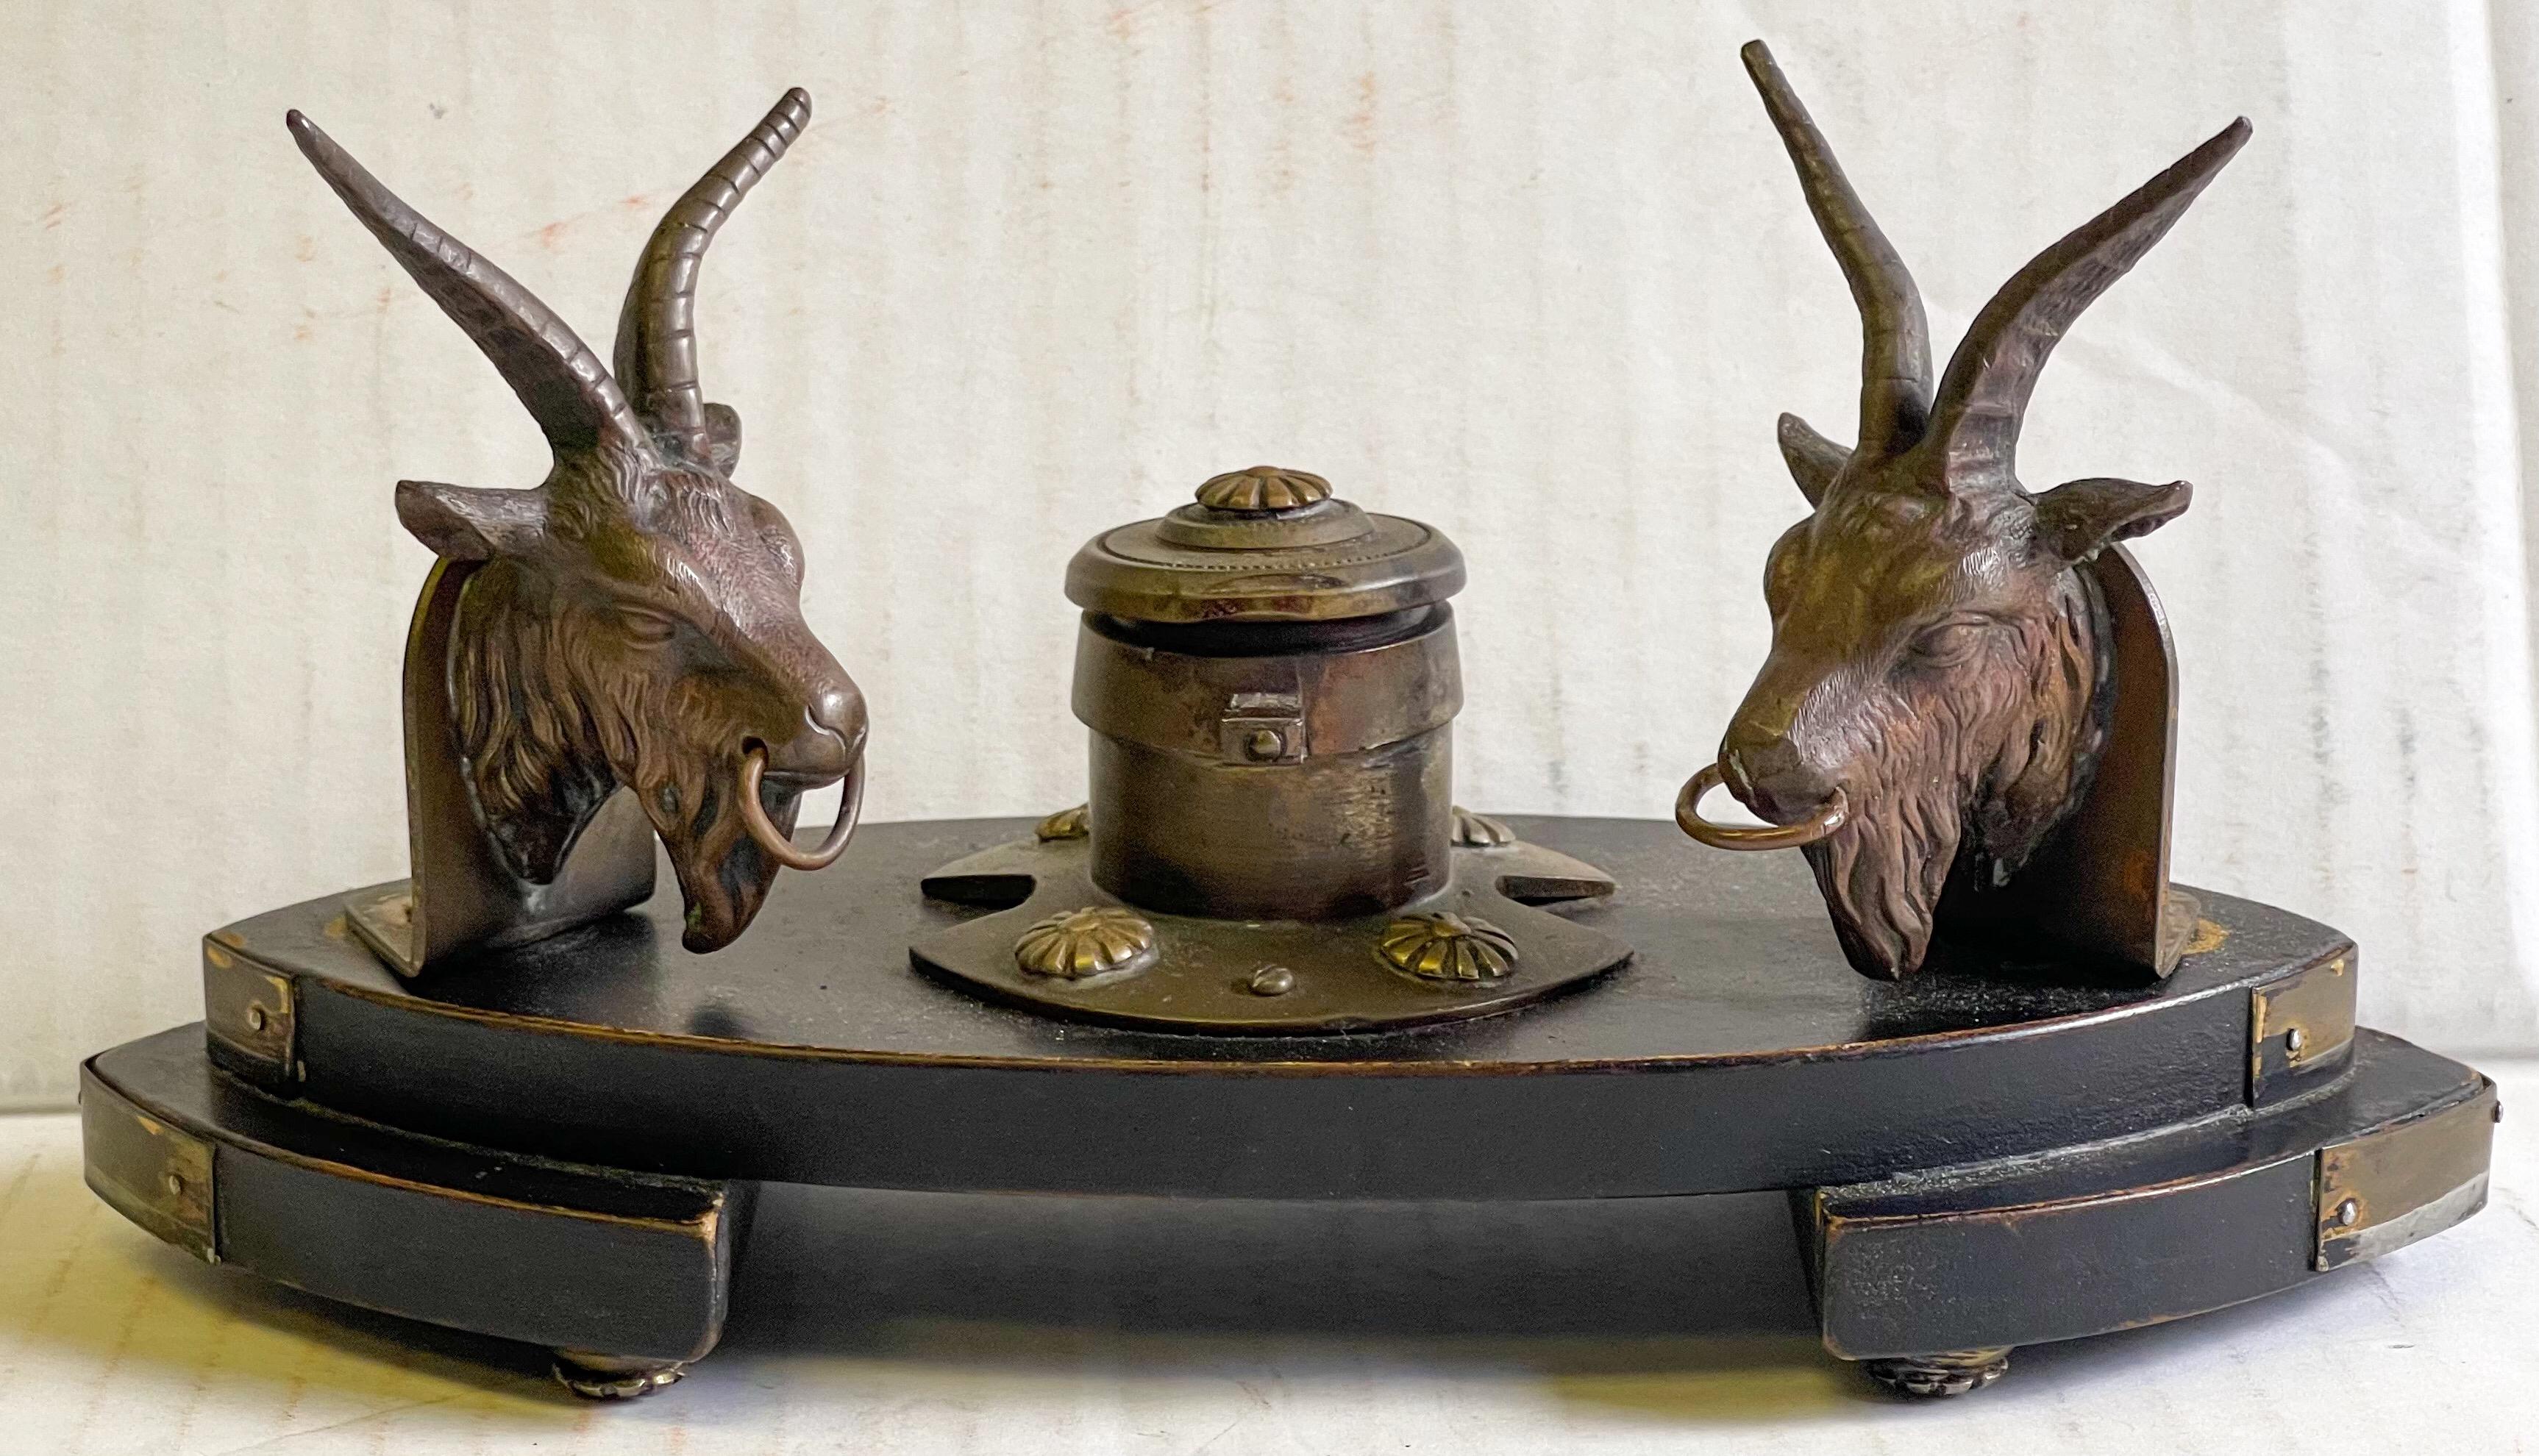 This is a mid-19th century French gilt bronze neo-classical style ram form inkwell. It has dual rams to possibly hold the writing instrument.